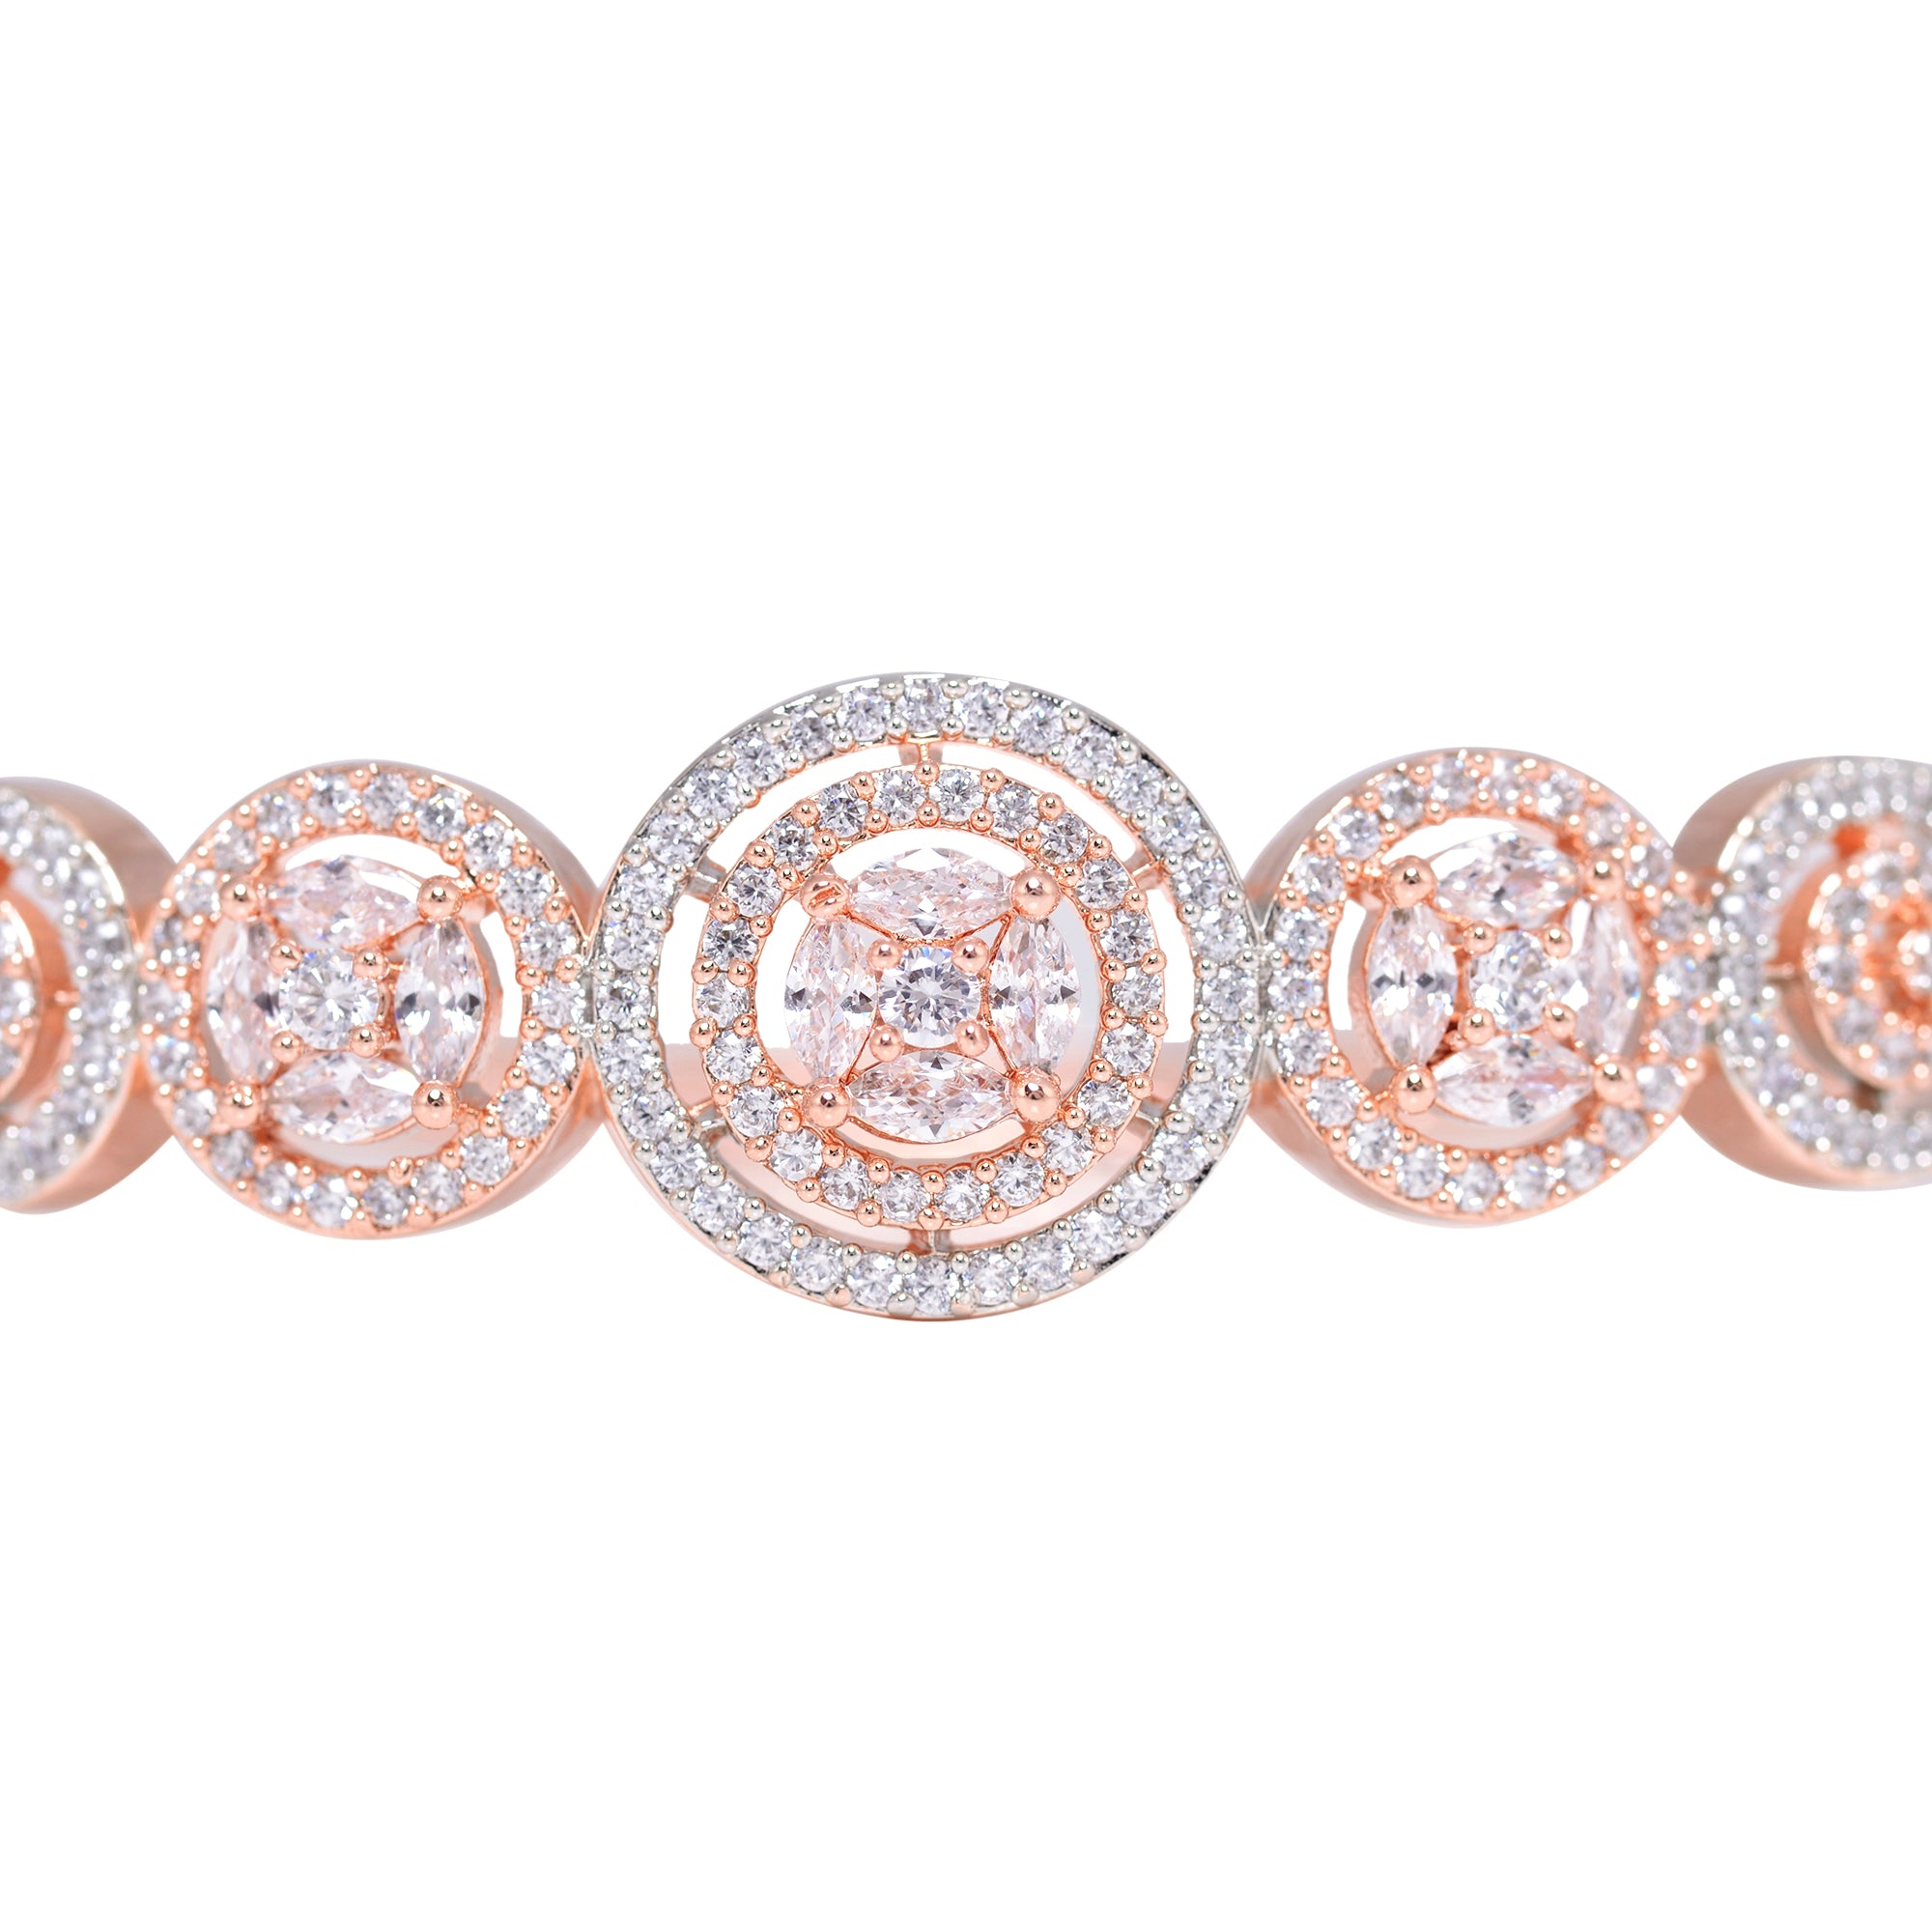 Diamond Encrusted Handcrafted Bracelet, Rose Gold Plated For Women And Girls - Saraf Rs Jewellery